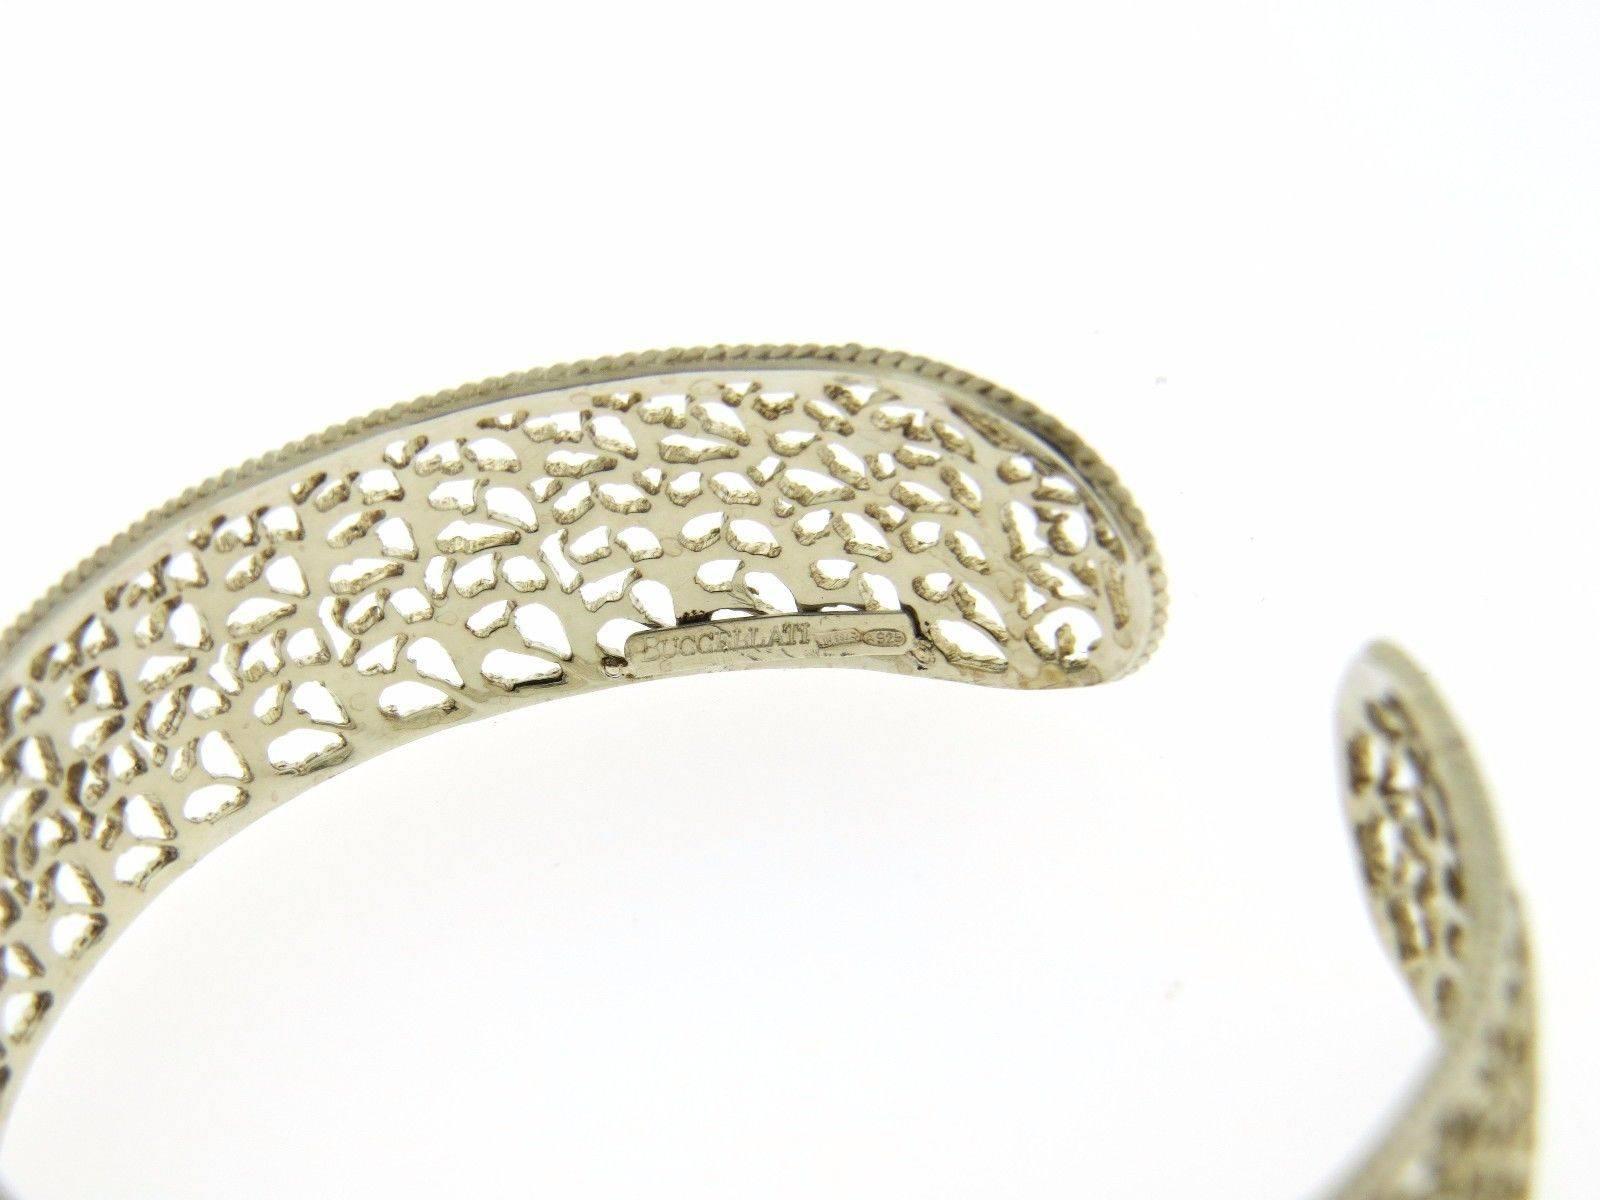 A sterling silver cuff bracelet by Buccellati. The cuff measures 15mm wide, will fit 7-7.5